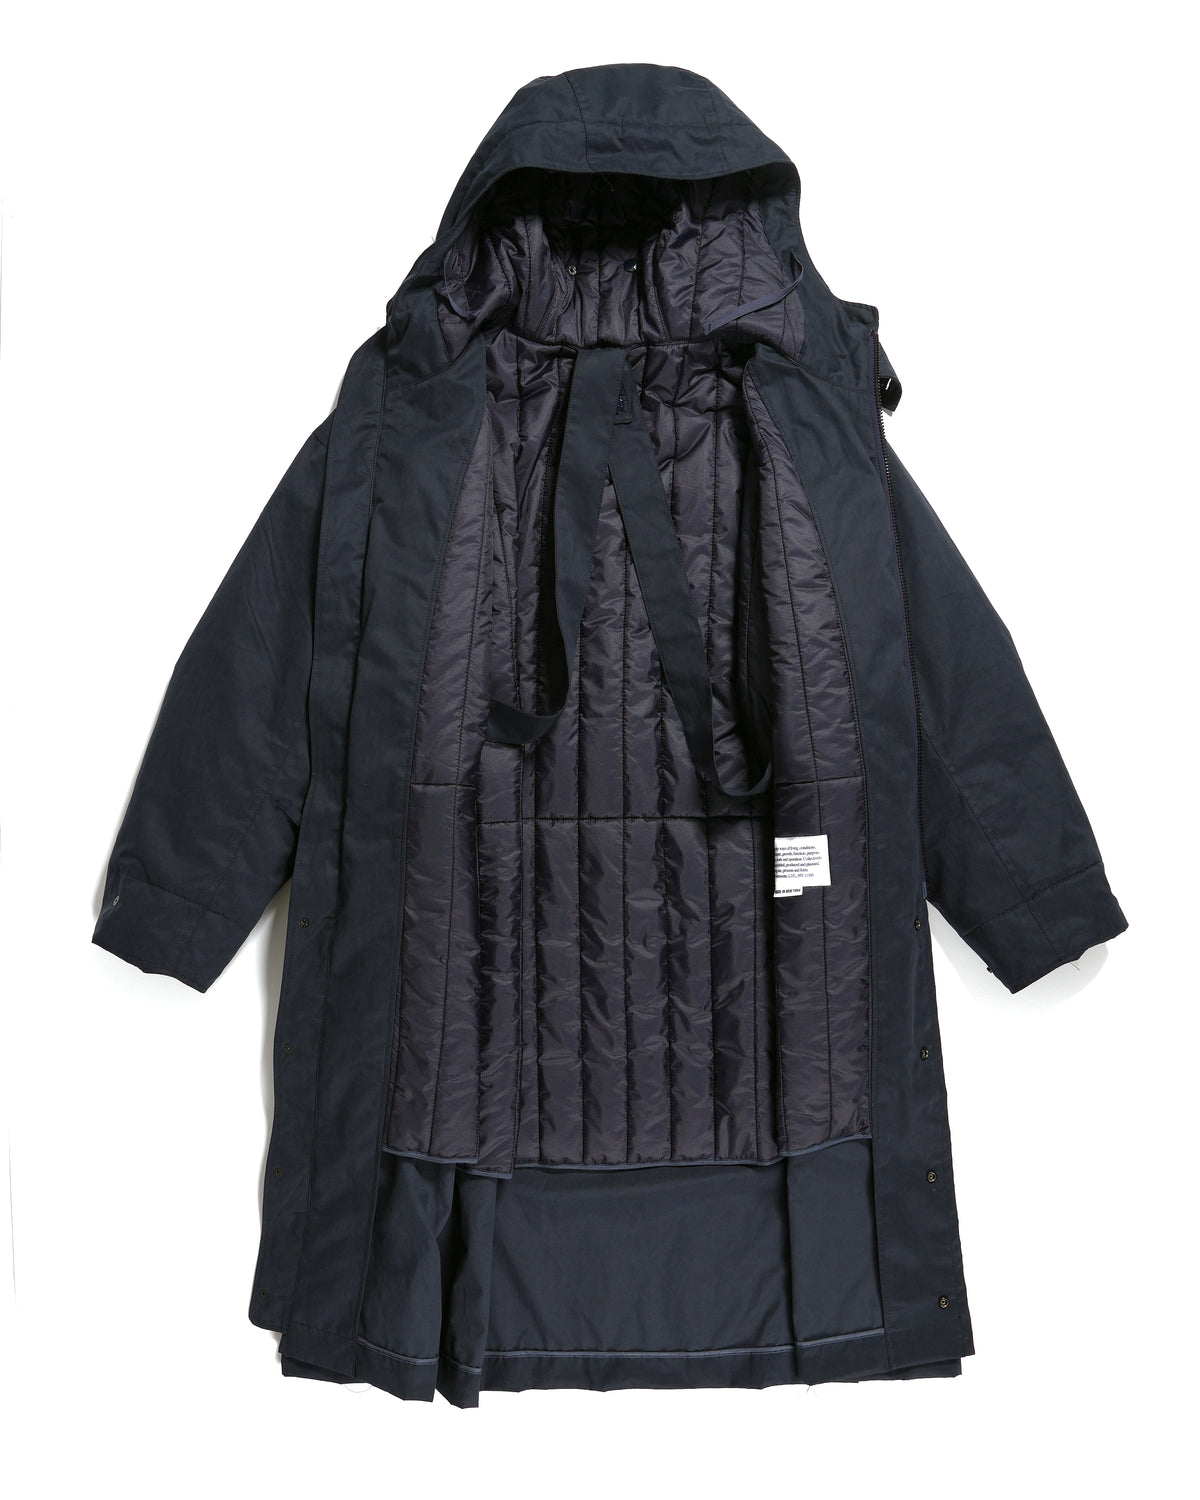 Storm Coat - Dk. Navy PC Coated Cloth | Nepenthes New York